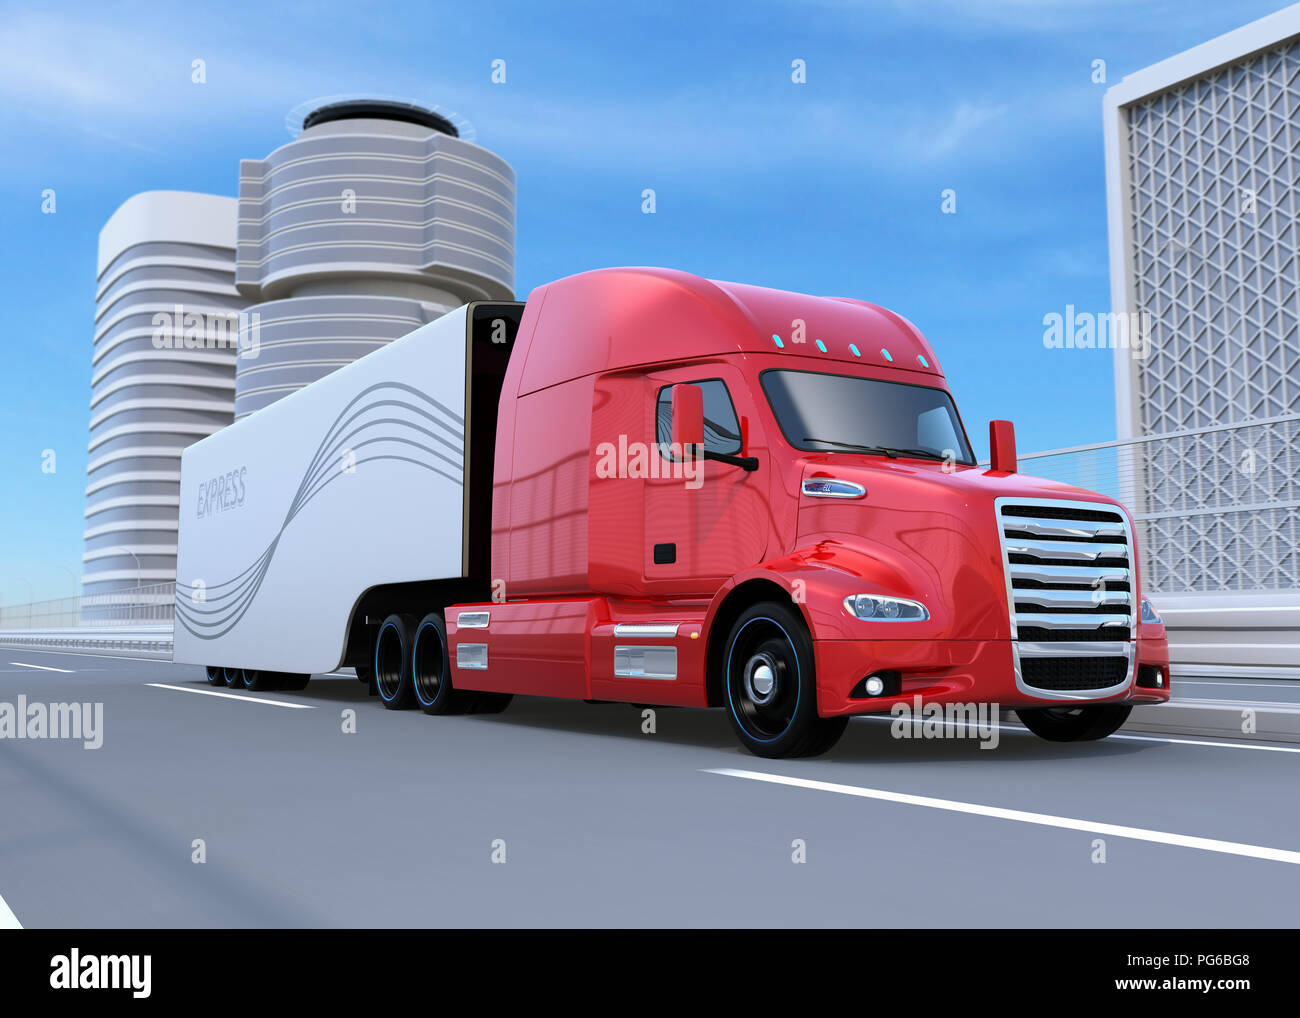 Metallic red Fuel Cell Powered American Truck driving on highway. 3D rendering image. Stock Photo